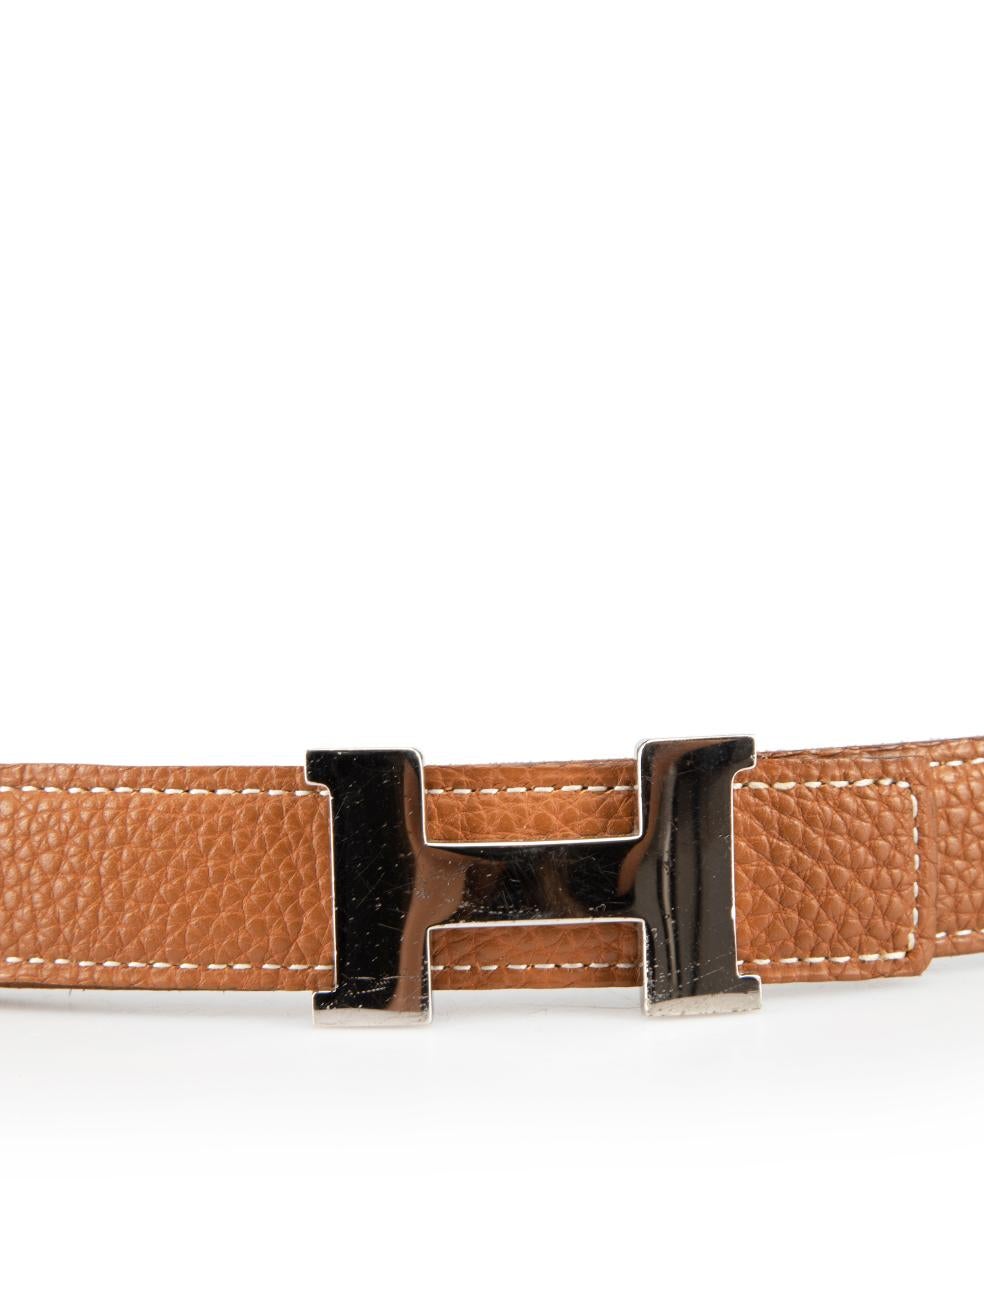 CONDITION is Very good. Minimal wear to belt is evident. Minimal wear to the buckle with scratches to the metal on this used Hermès designer resale item.




Details


Brown

Leather

Skinny belt

Reversible

Silver metal H logo buckle

Press stud